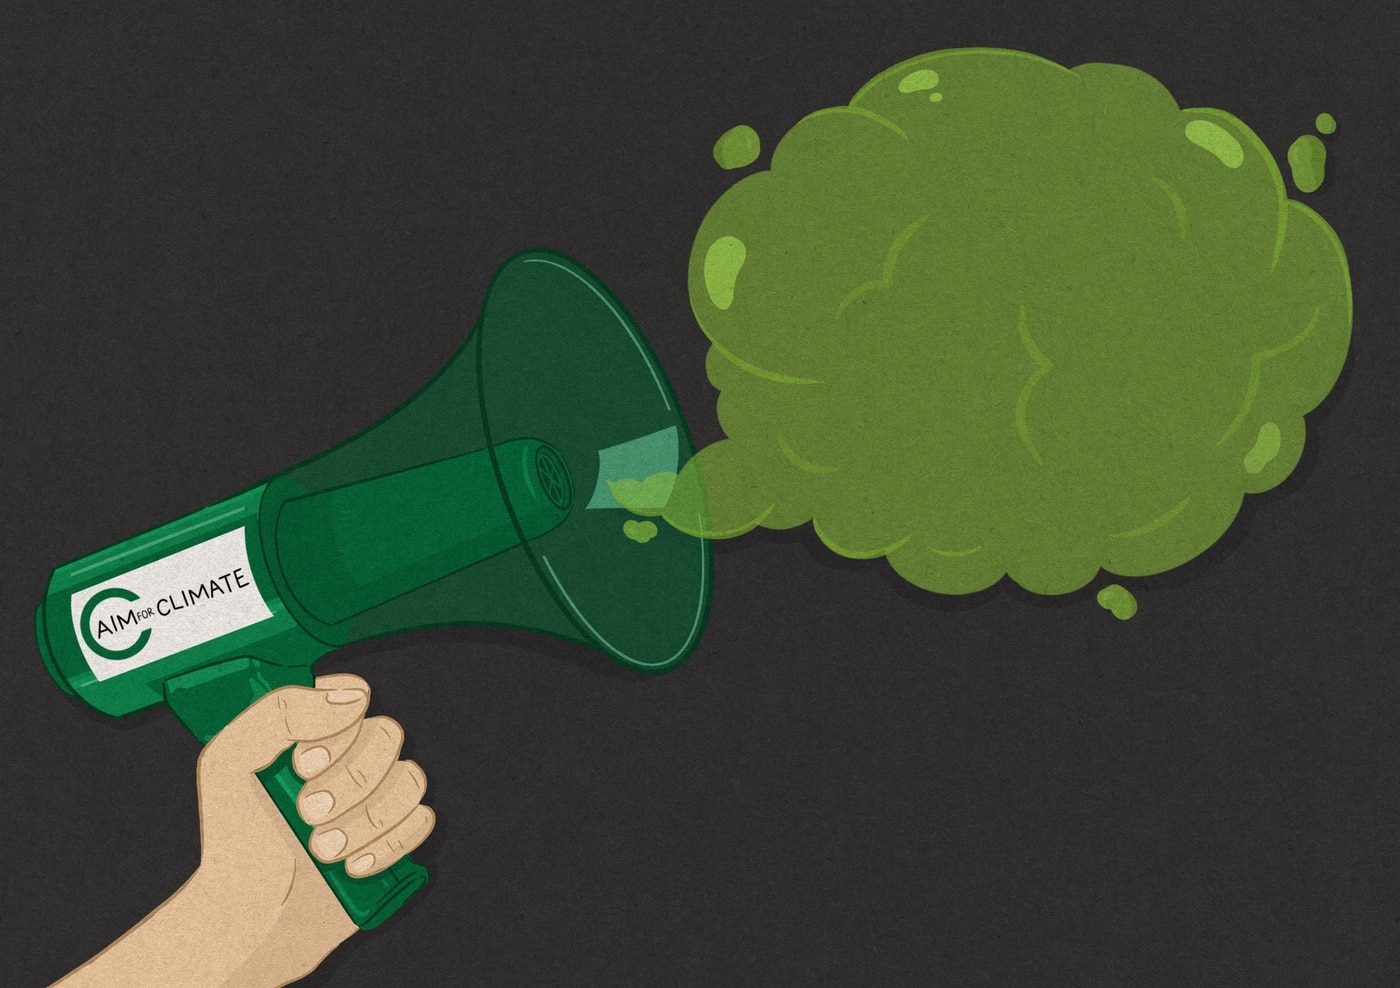 an illustration of a green megaphone labeled "Aim4C" emitting a green puff of smoke